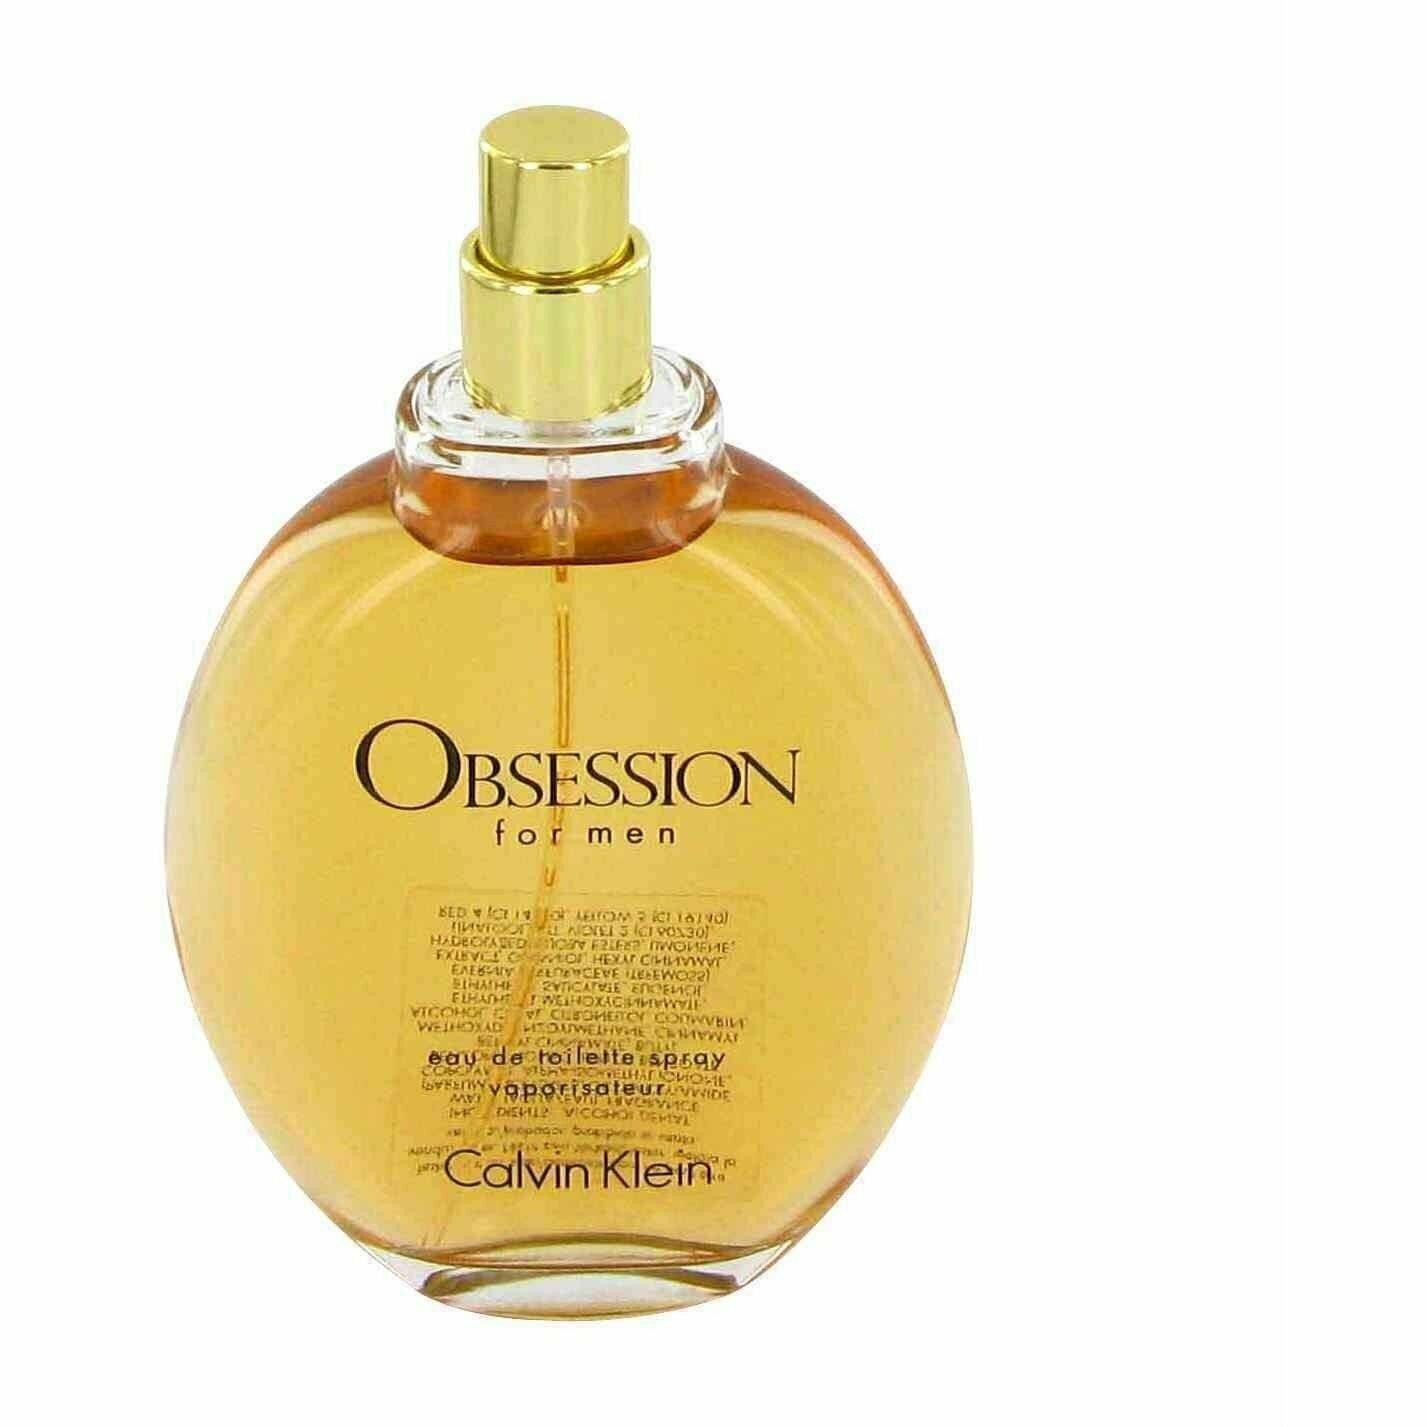 OBSESSION by Calvin Klein CK 4.0 oz edt Cologne New in Box tester